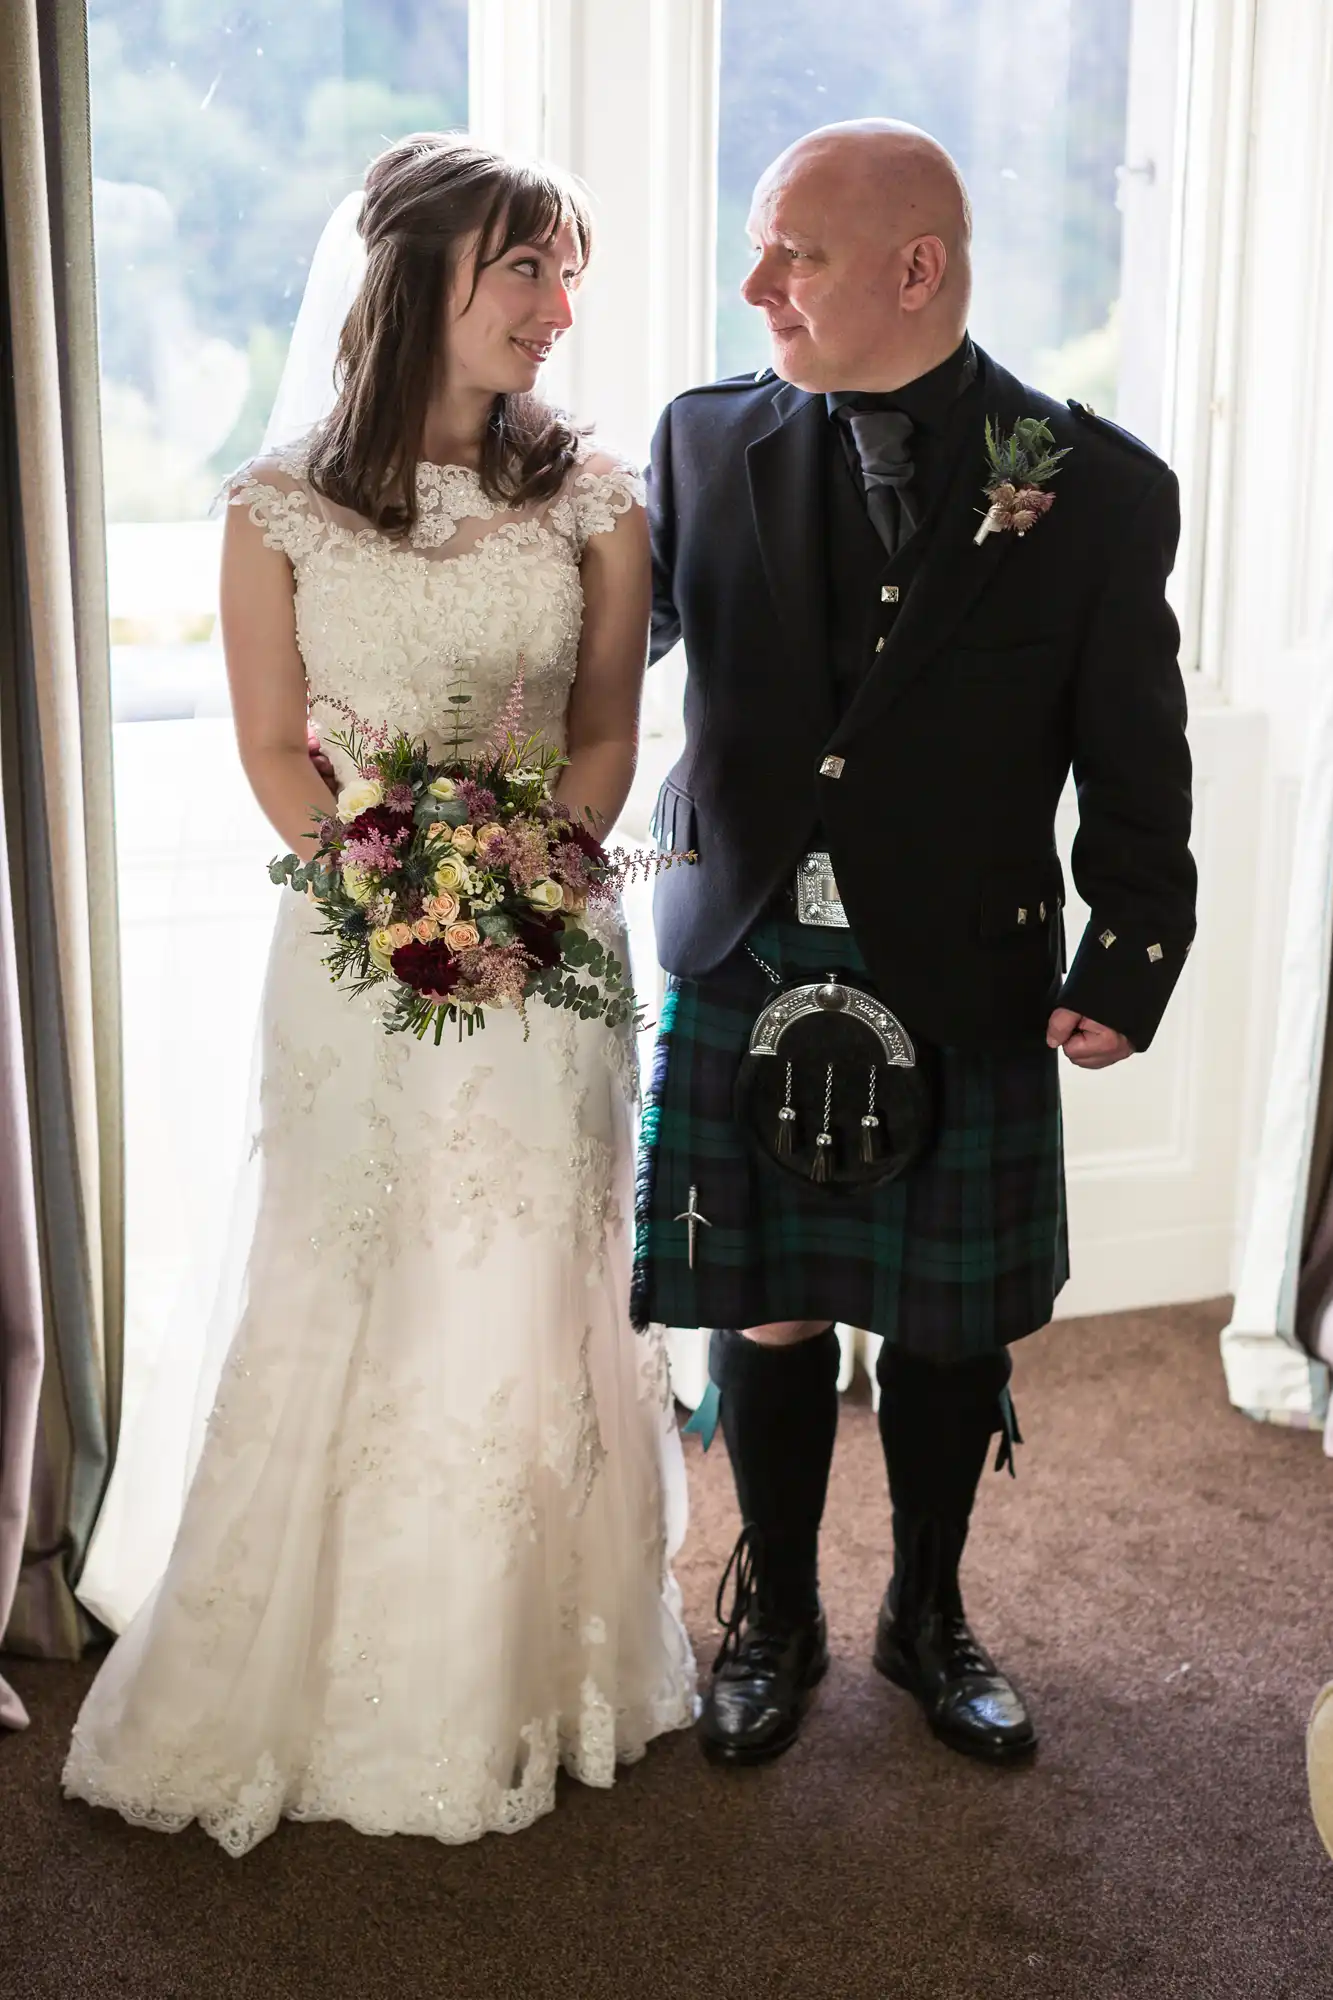 A bride in a lace wedding gown and a groom in a traditional scottish kilt and sporran sharing a joyful moment indoors by a window.